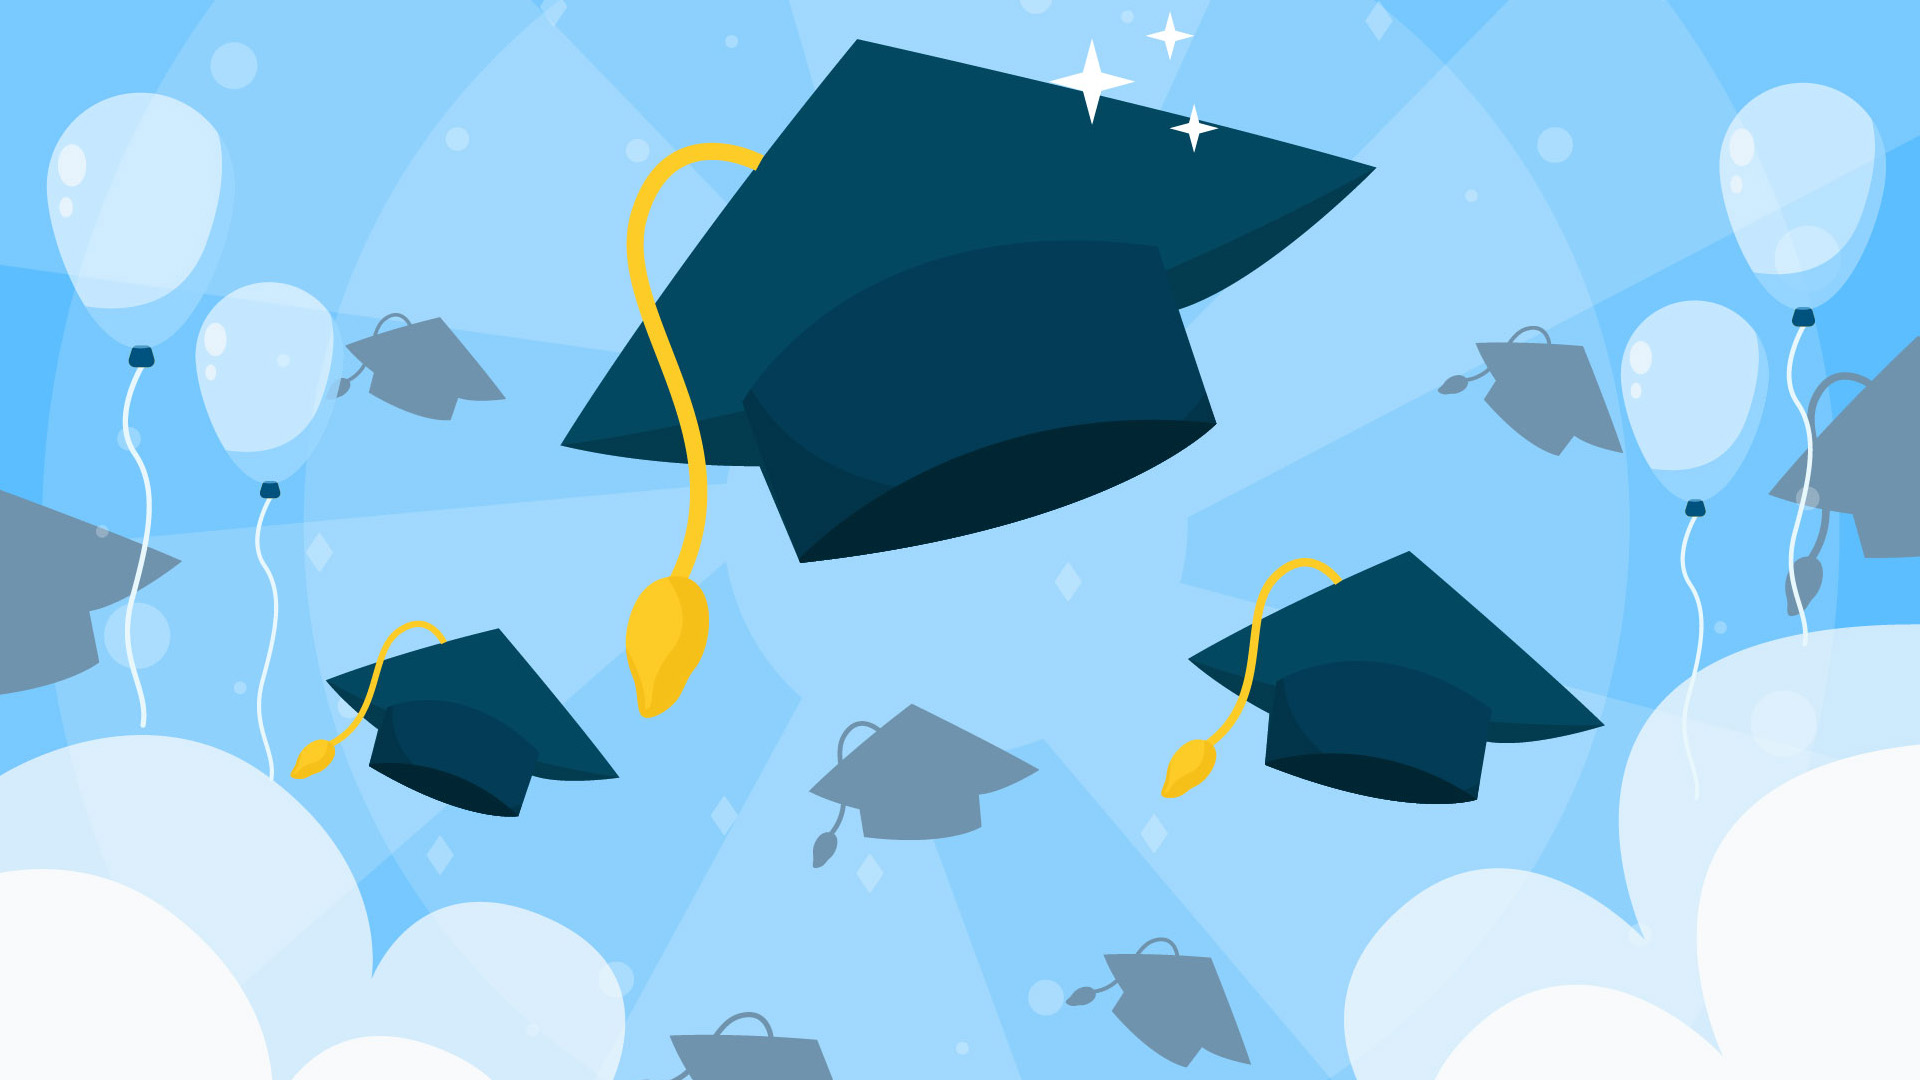 tints of blue span the background of this graphic. there are multiple graduation hats in the air, 3 being more prominent and detailed.